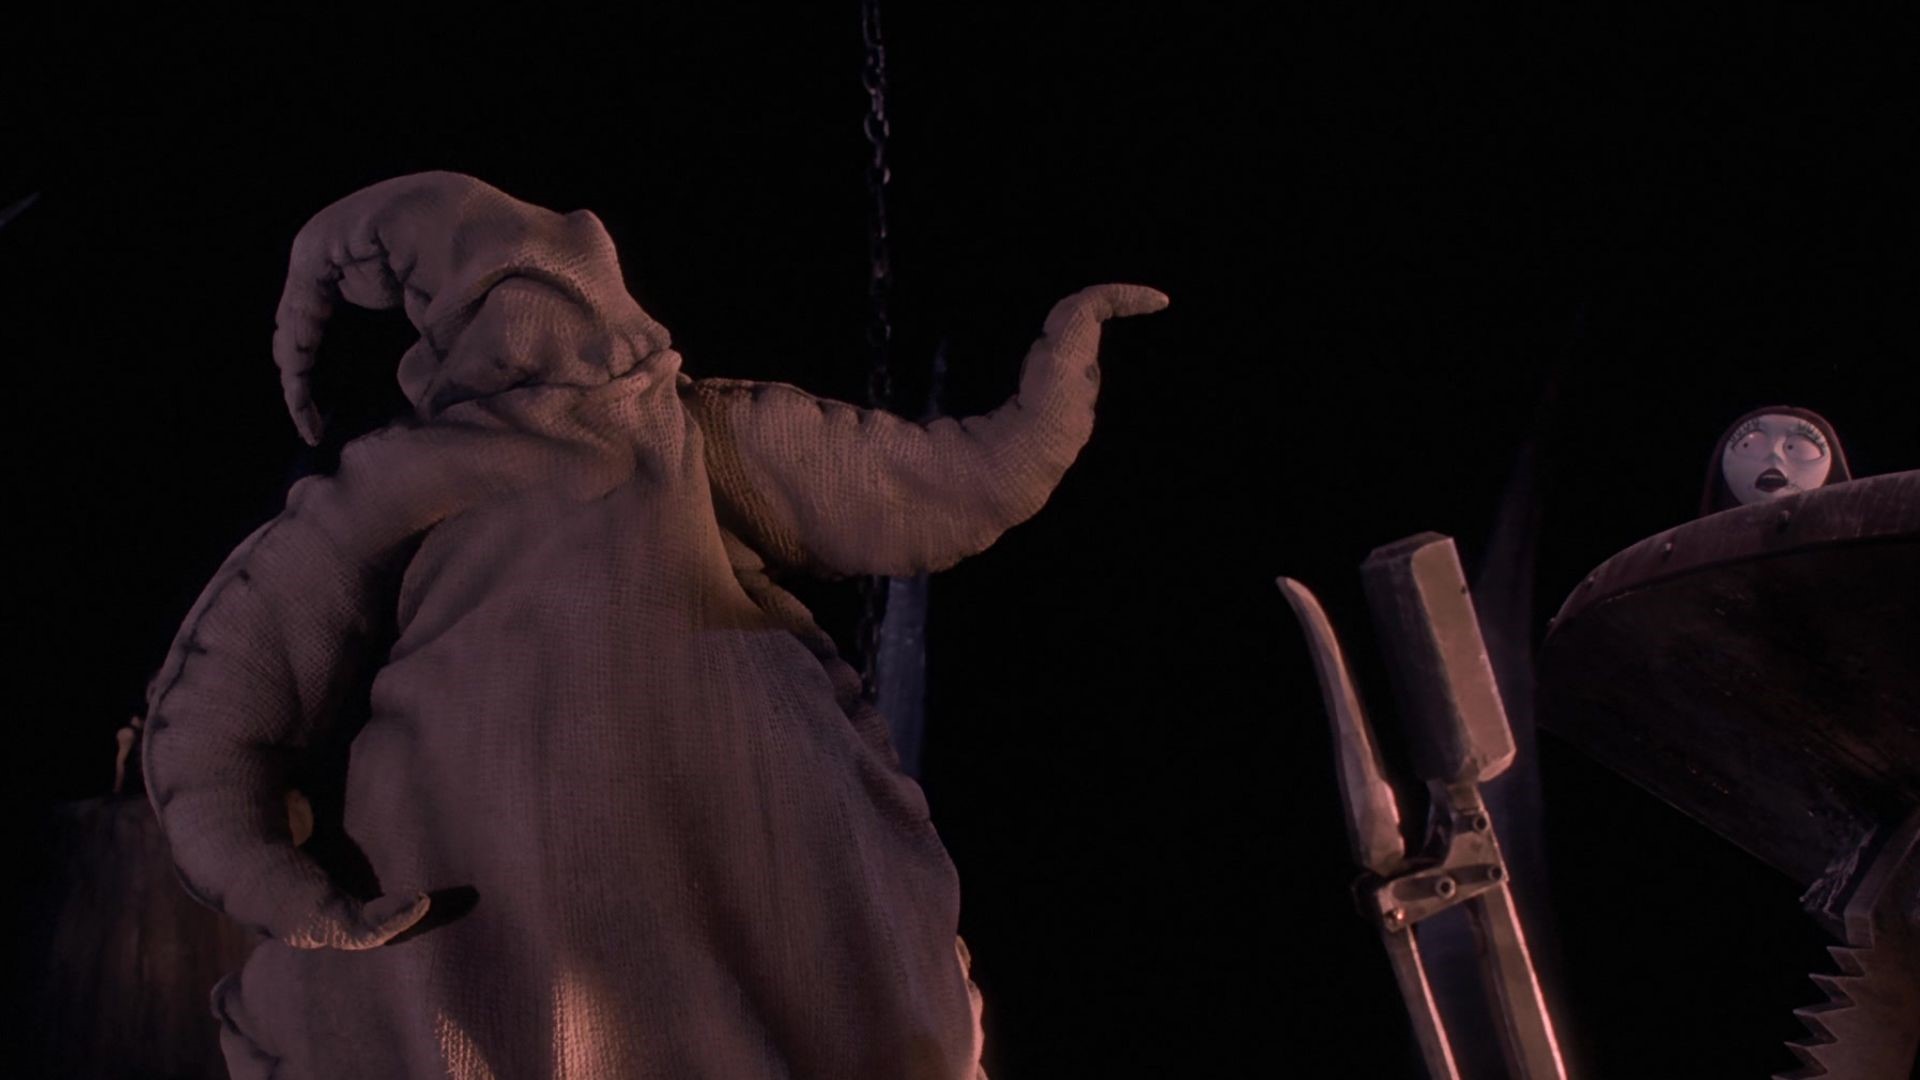 19-facts-about-oogie-boogie-the-nightmare-before-christmas